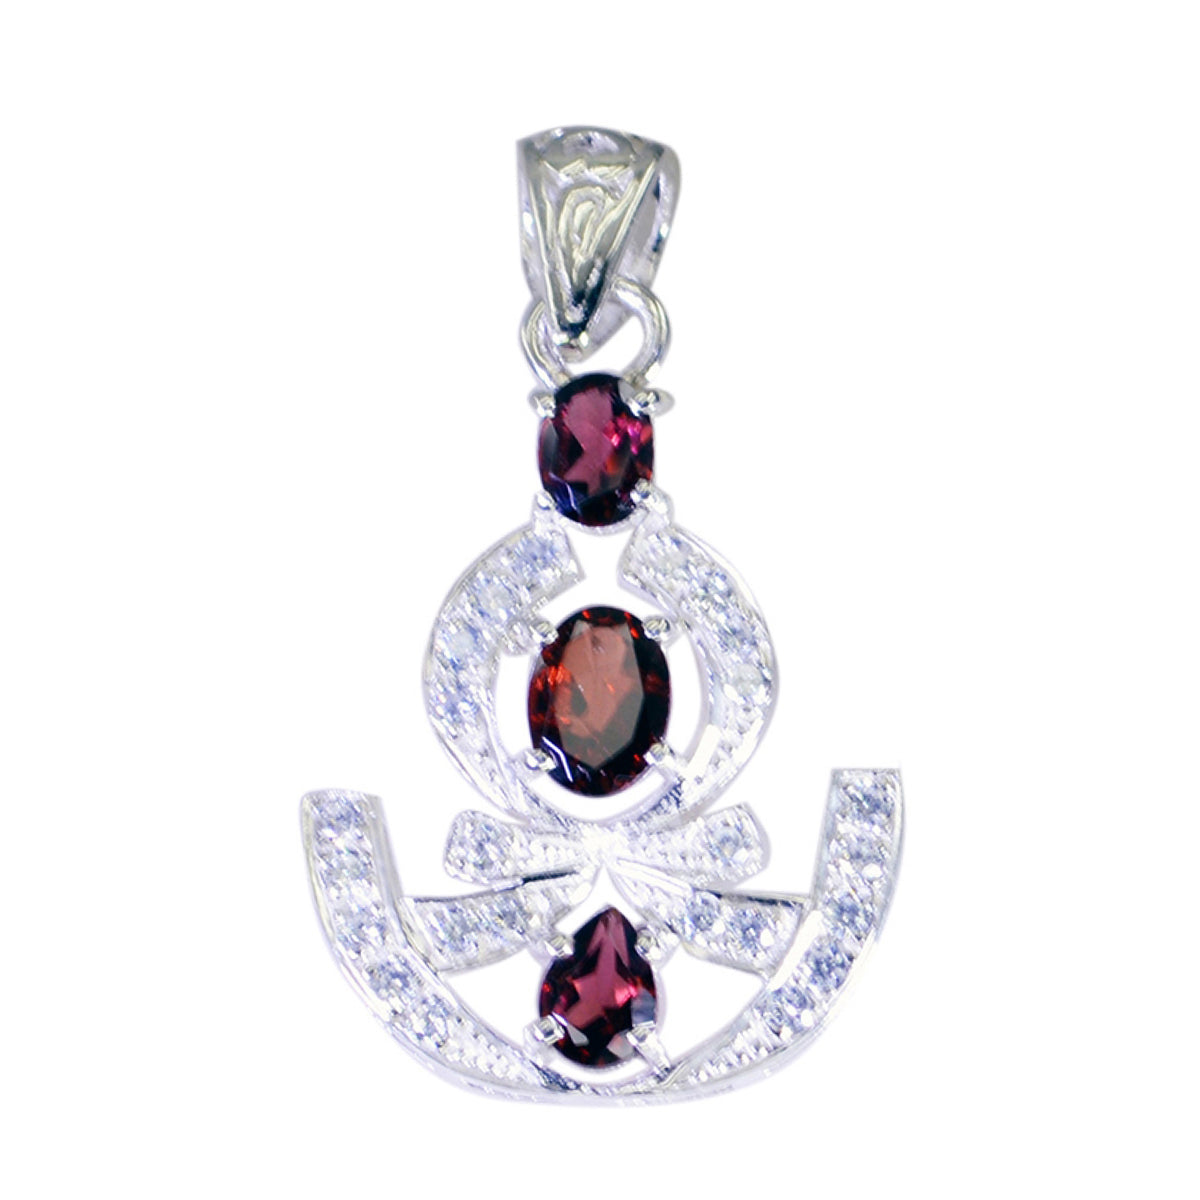 Riyo Gorgeous Gems Multi Faceted Red Garnet Silver Pendant Gift For Boxing Day